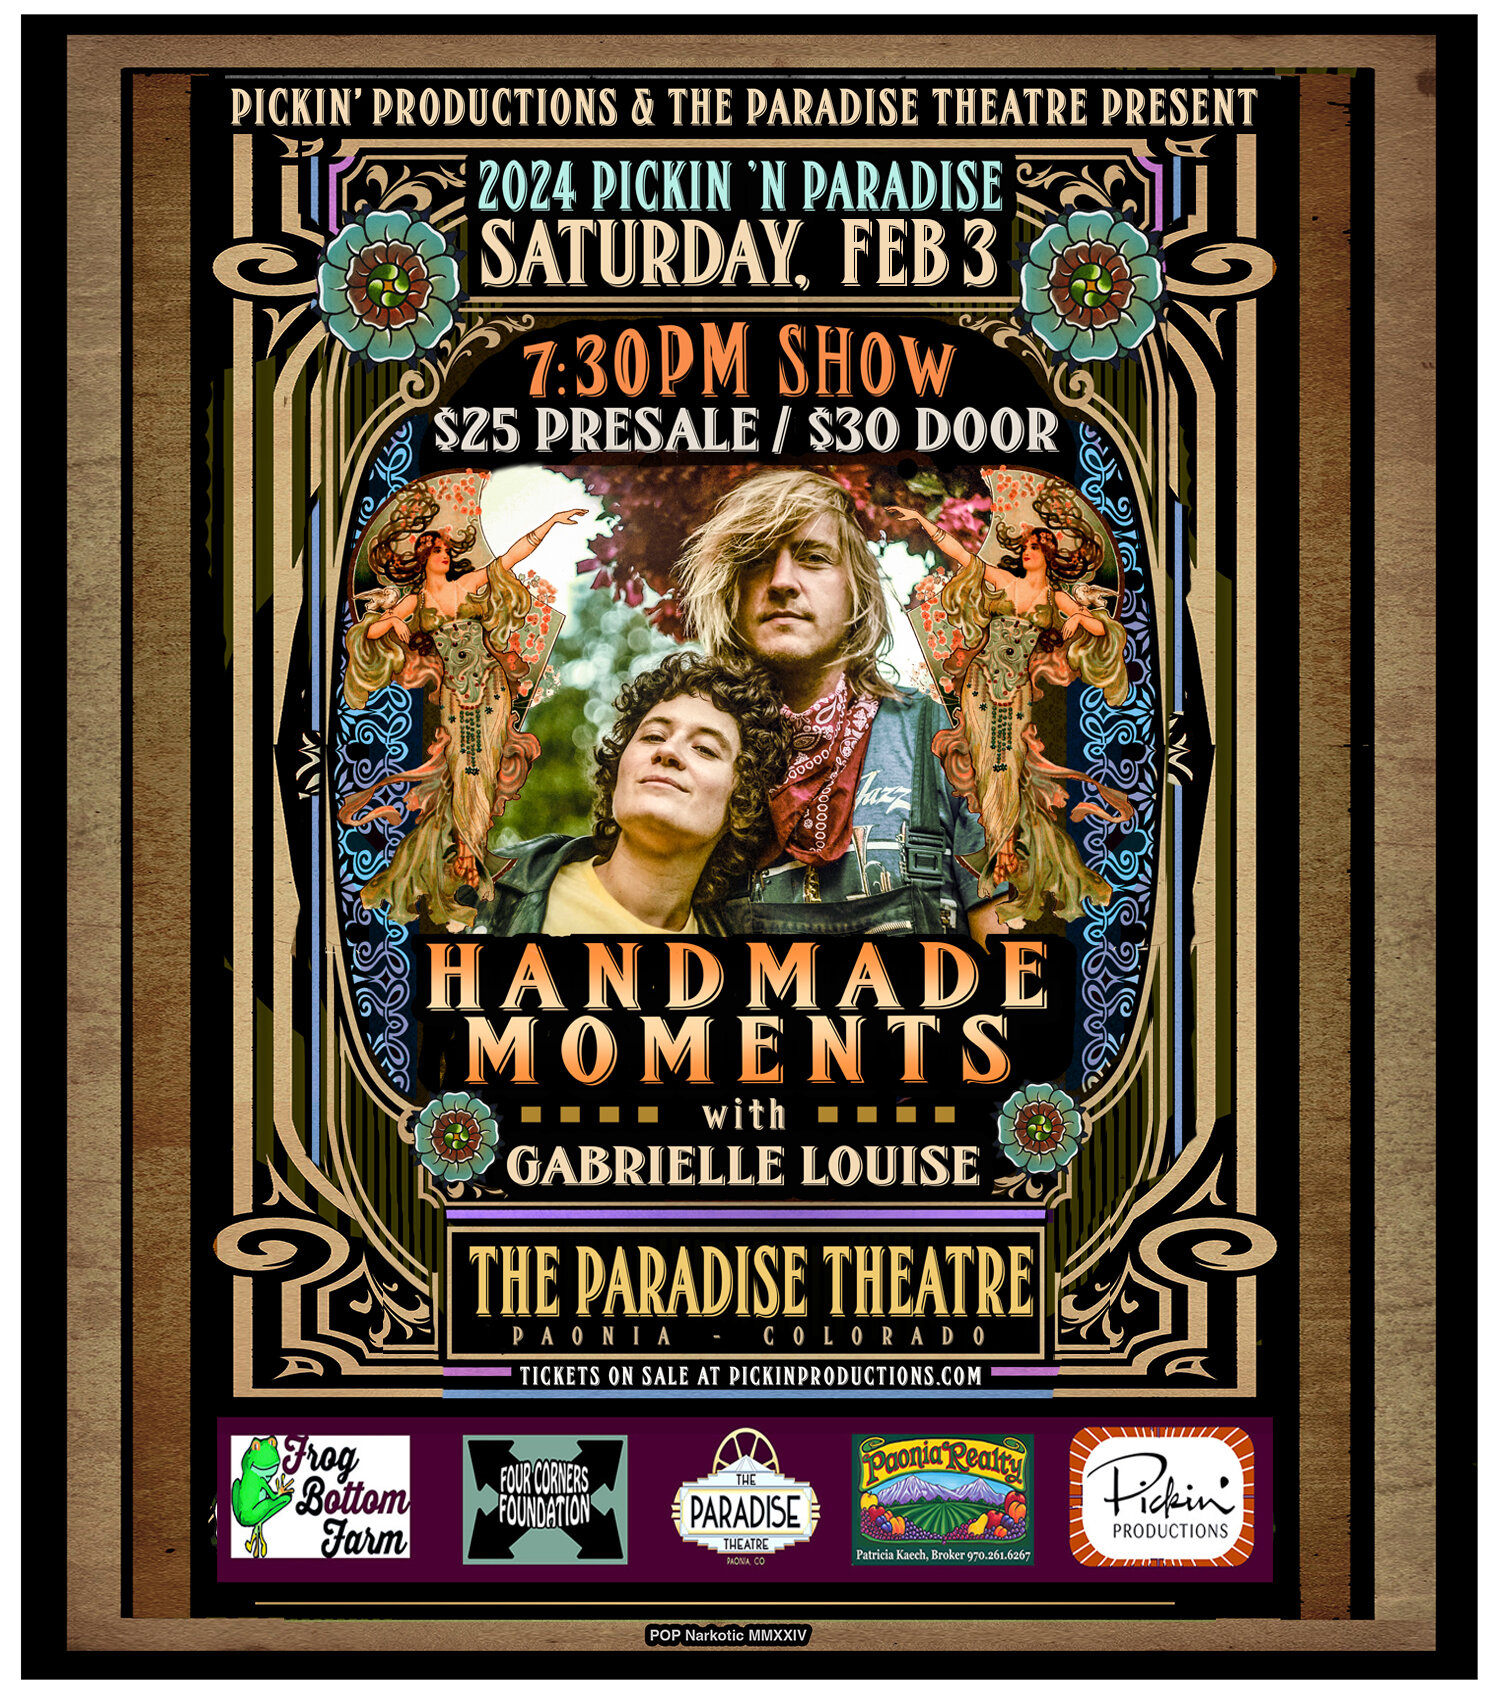 Pickin' Productions and Paradise Theatre of Paonia present Handmade Moments with Gabrielle Louise  on Saturday, Feb 3rd at the Paradise Theatre in Paonia, CO.

This show is THE way to kick off the 2024 Pickin 'n Paradise series!

Tickets $25 presale 